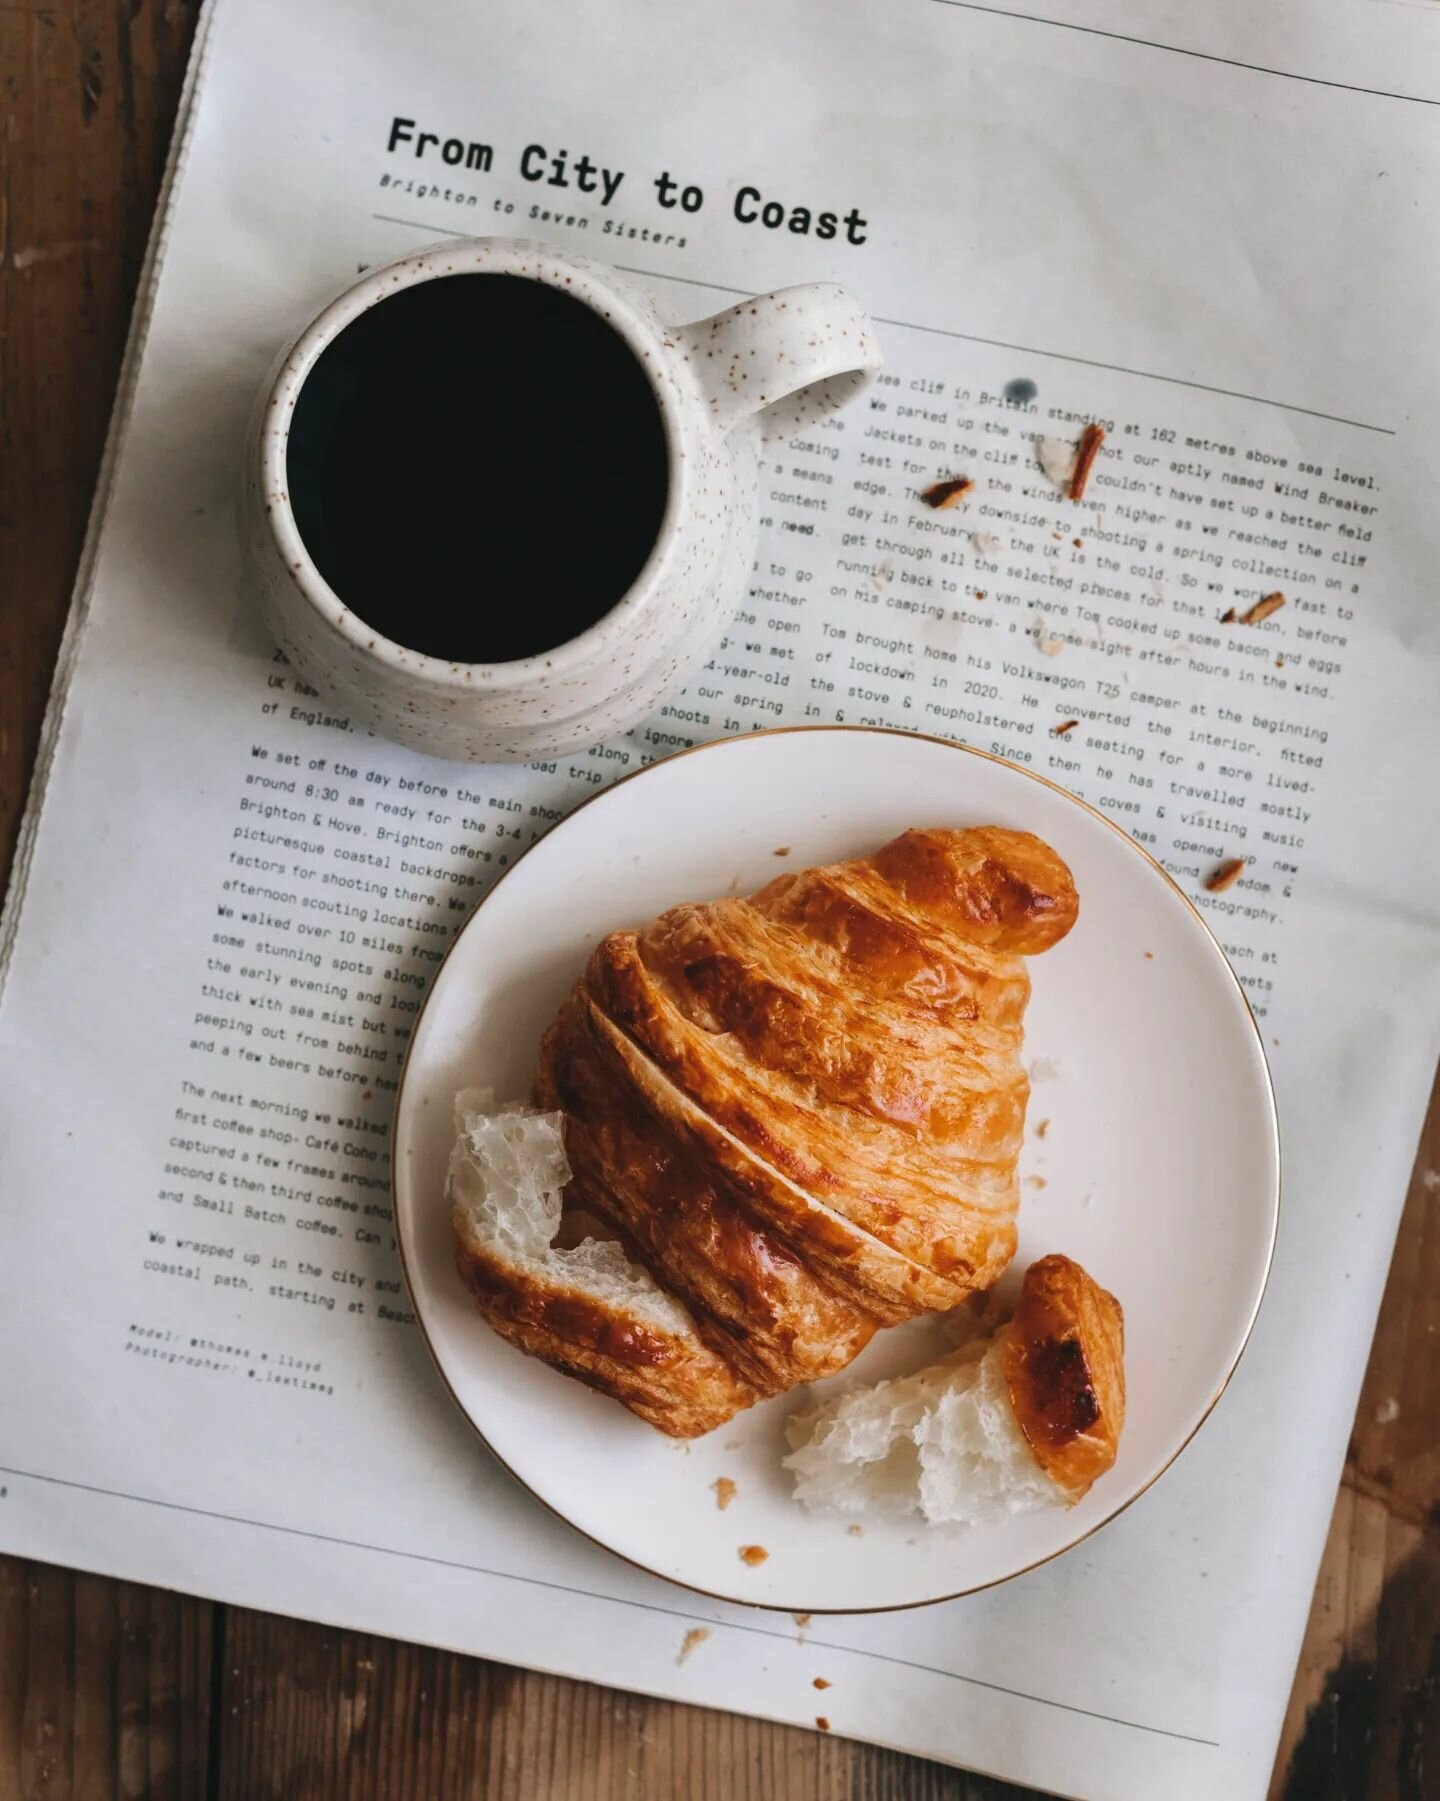 Afternoon snack

#photography #coffeebreak #croissant